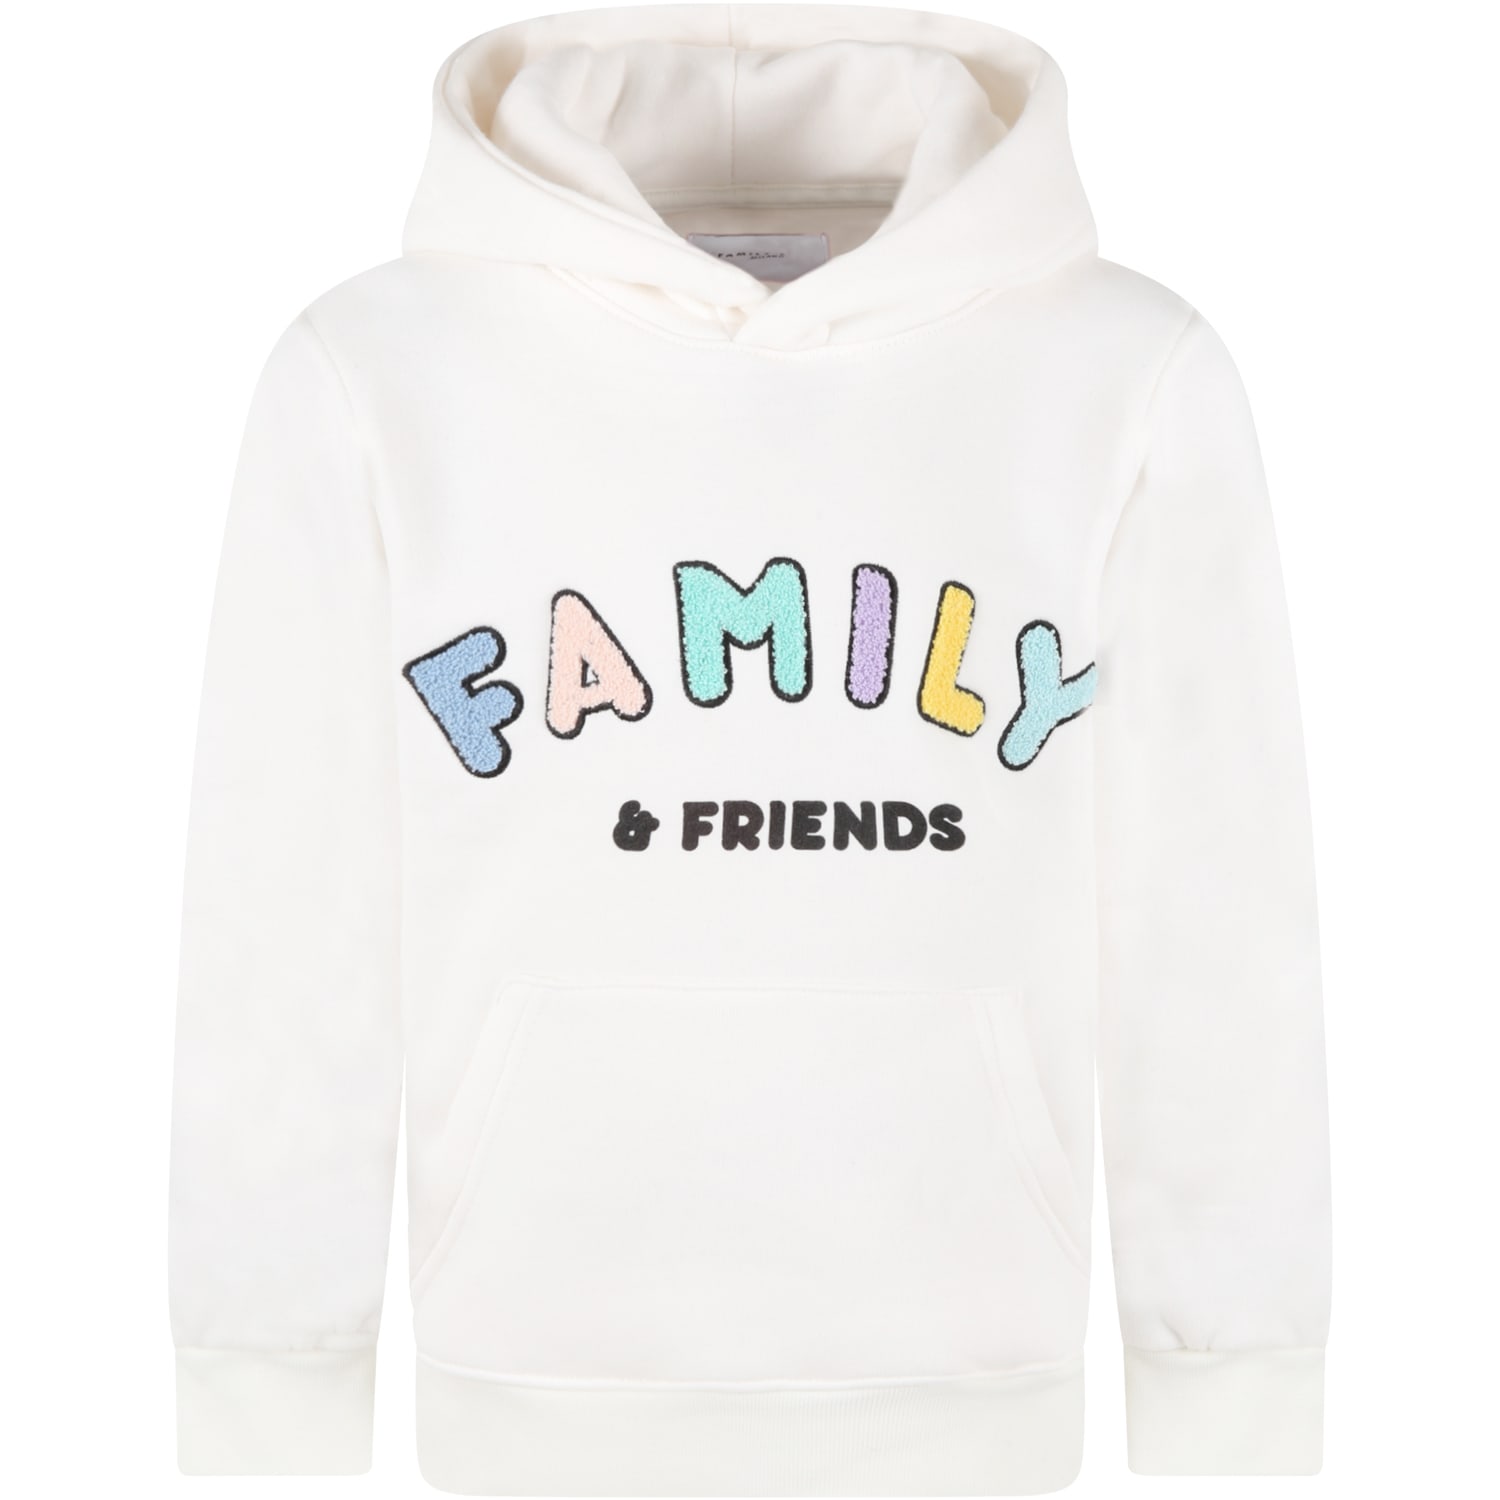 Family First Milano White Sweatshirt For Kids With Colorful Logo